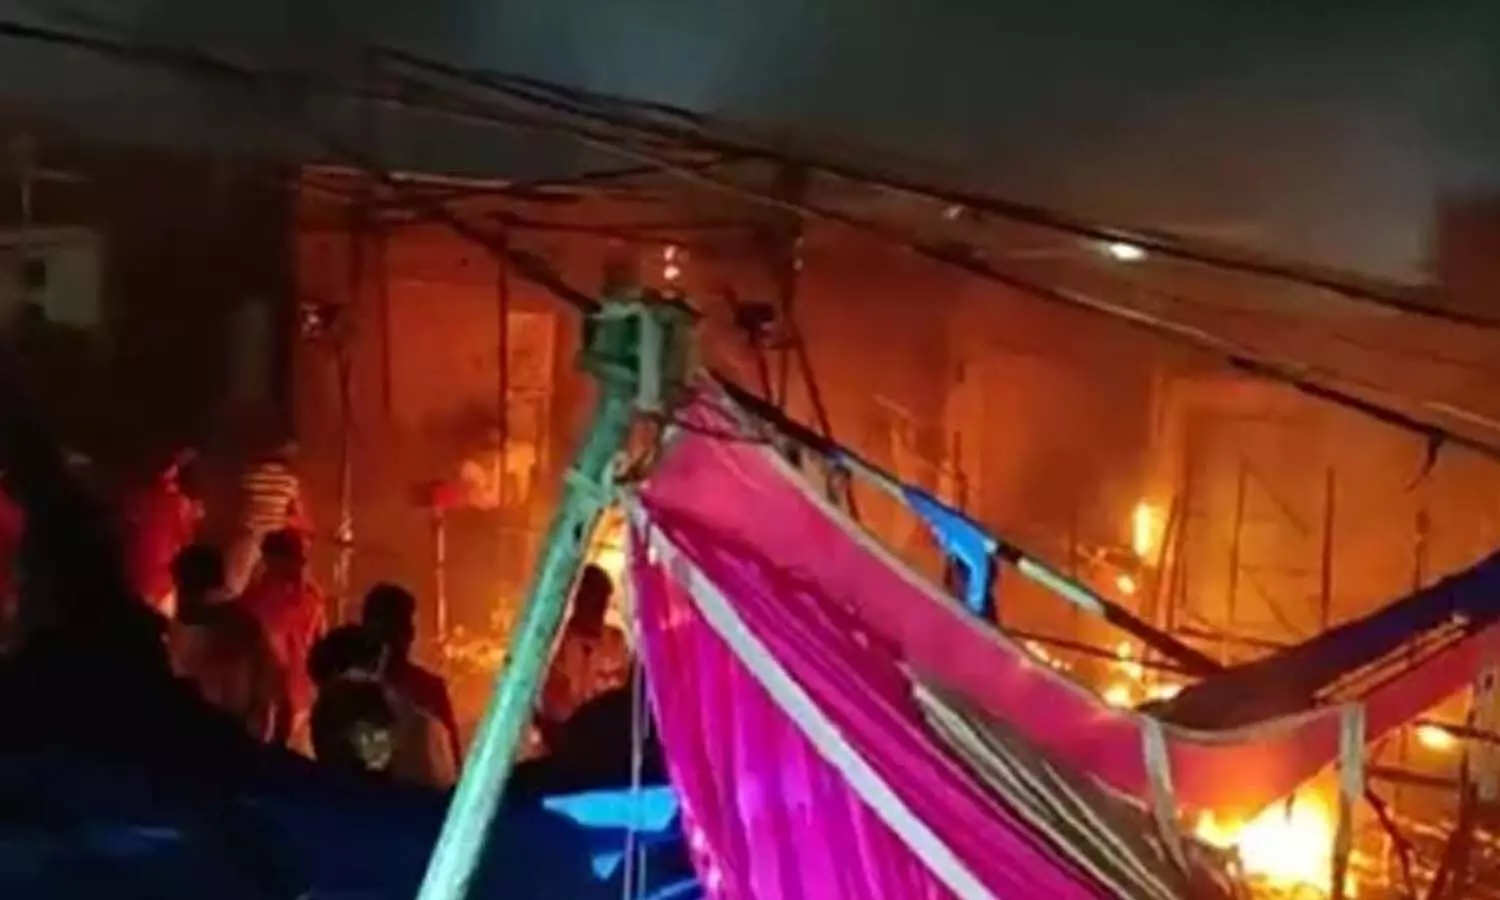 Bhadohi: Fire breaks out in Durga Puja pandal, 3 killed including 2 children